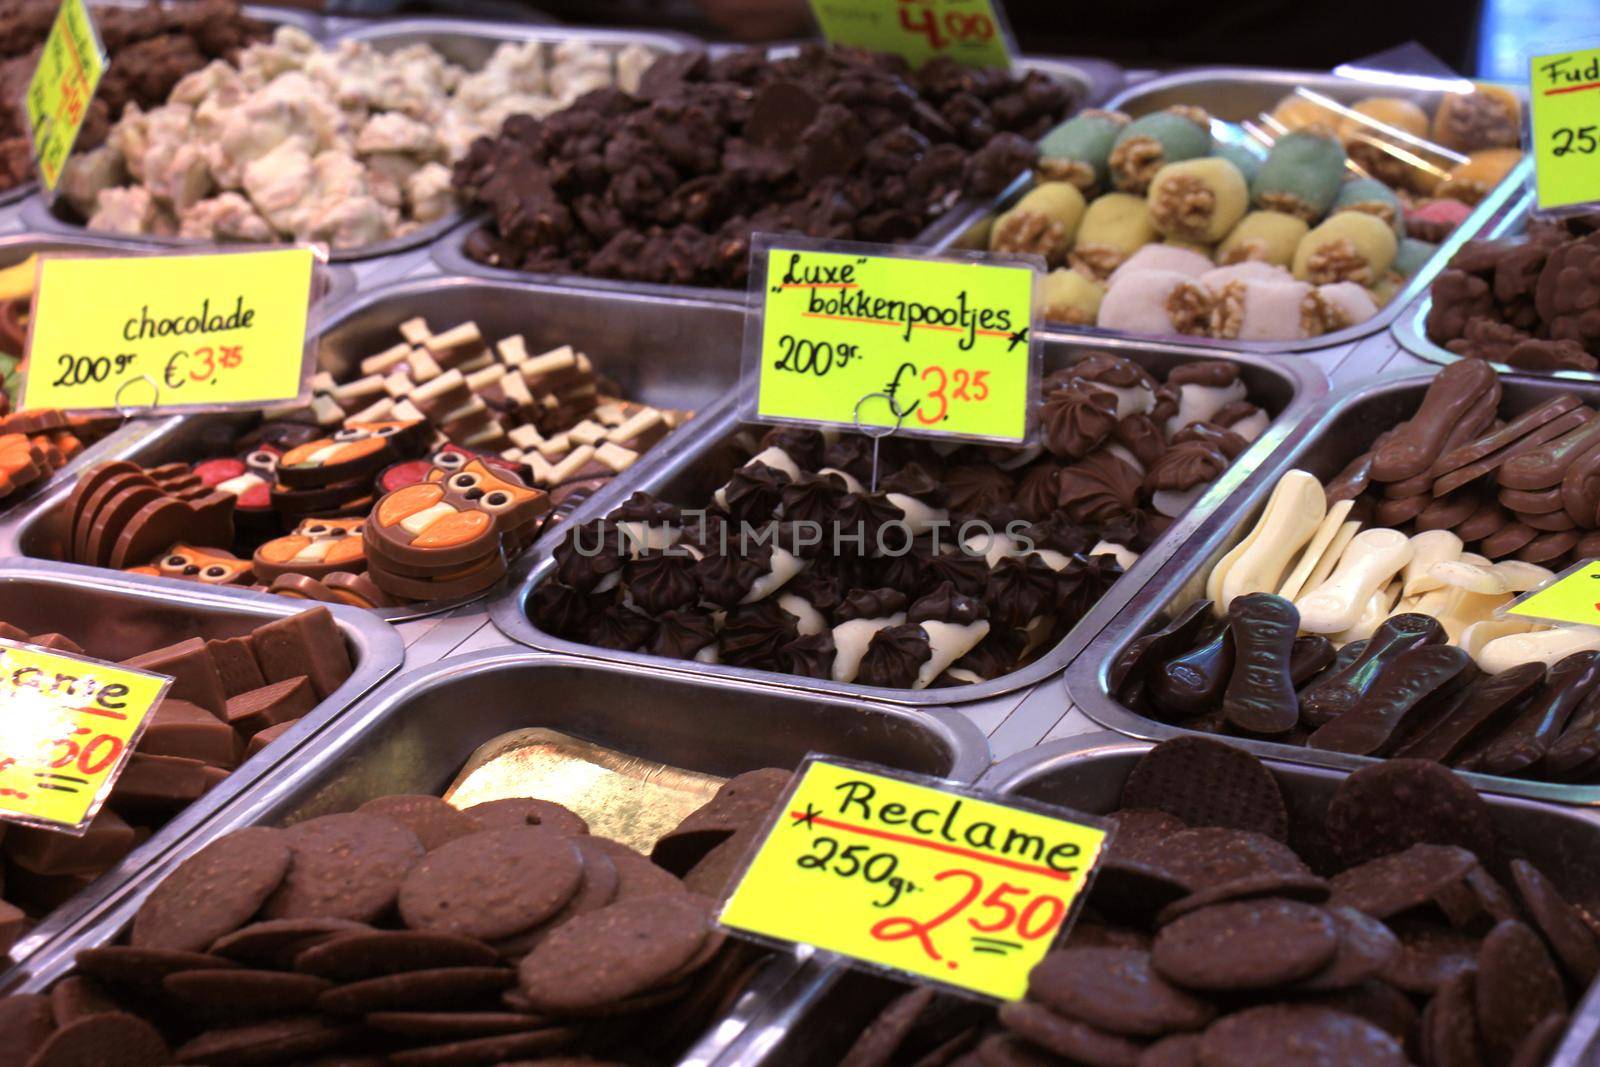 Chocolates on display on a confectioner's market stall (tags: prices and product information in Dutch, special offer and typical Dutch dark chocolate marzipan)